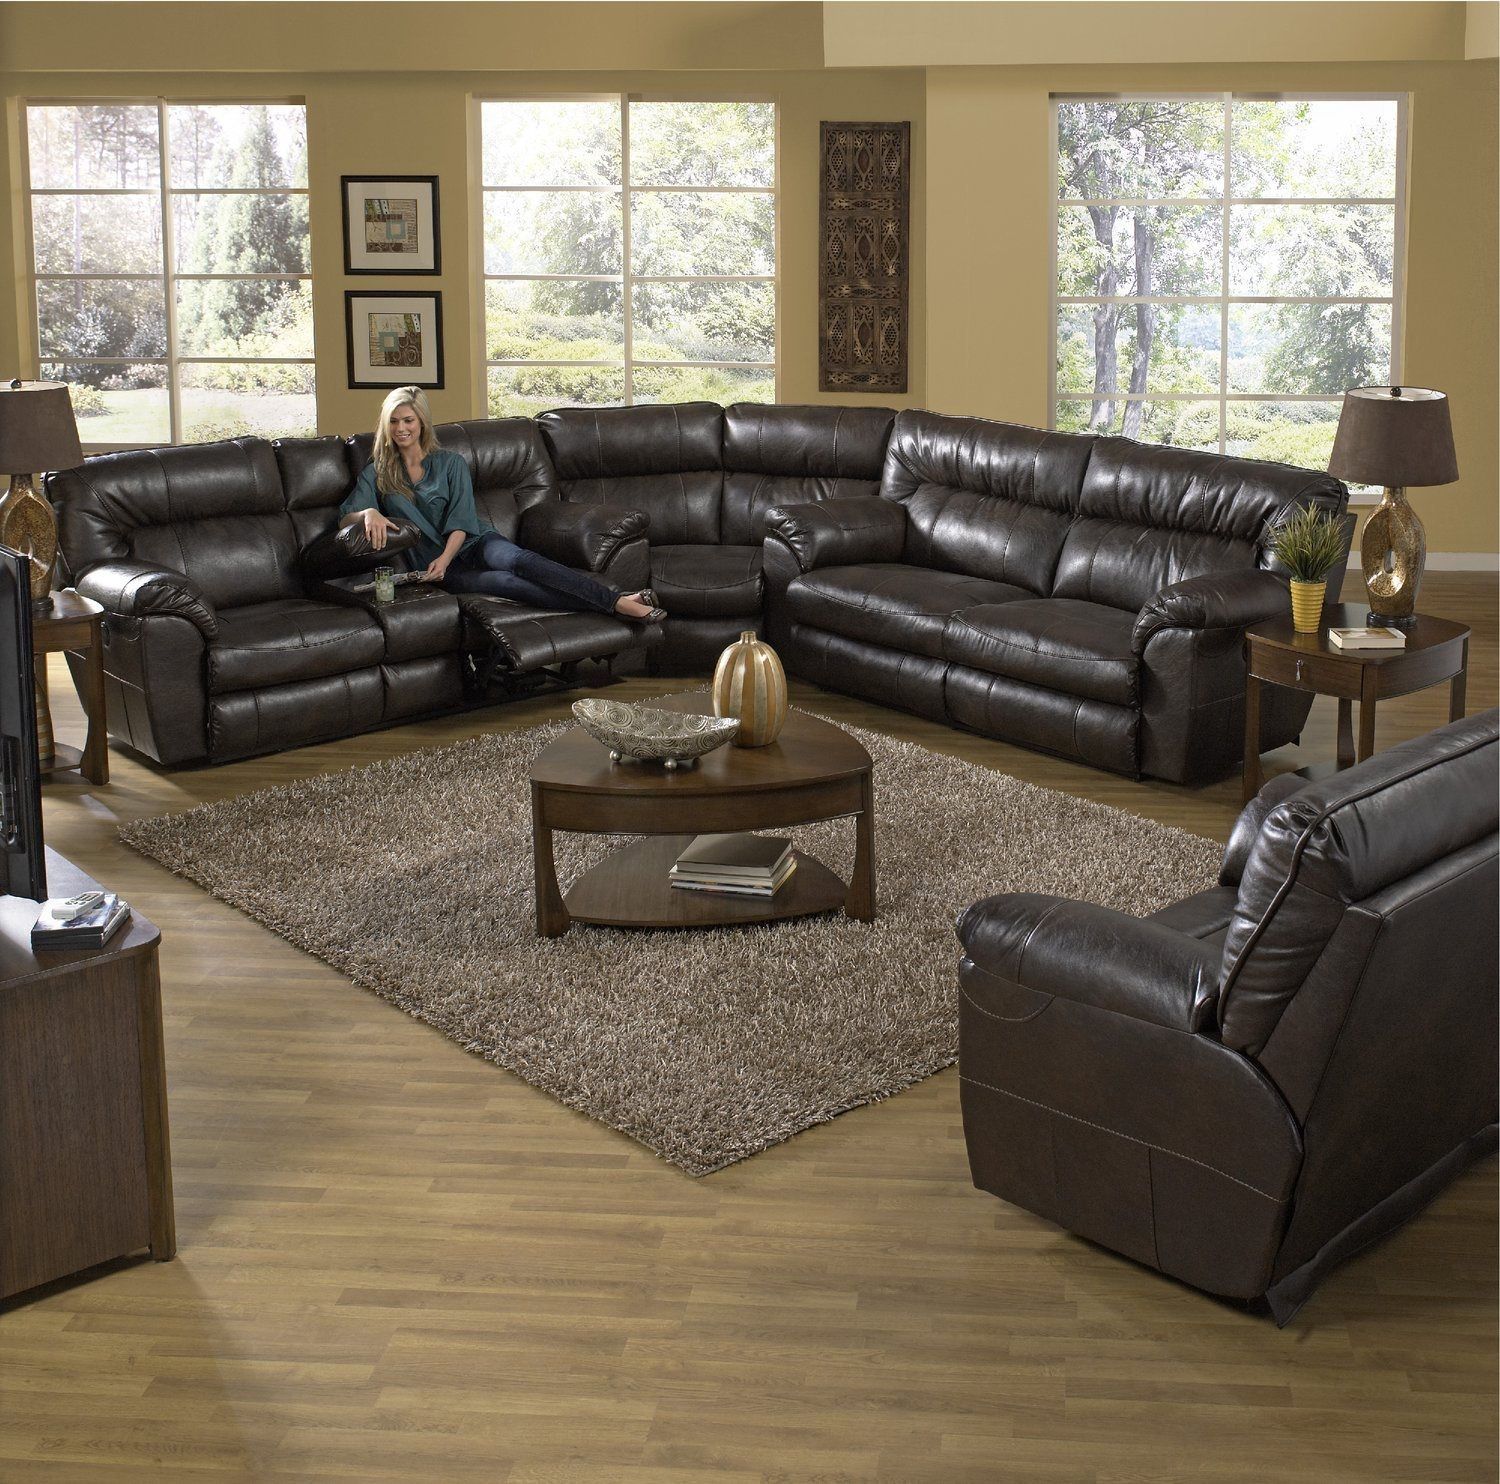 Ryan 3 Piece Reclining Sectional | Living Room Ideas | Pinterest Intended For Minneapolis Sectional Sofas (Photo 1 of 10)